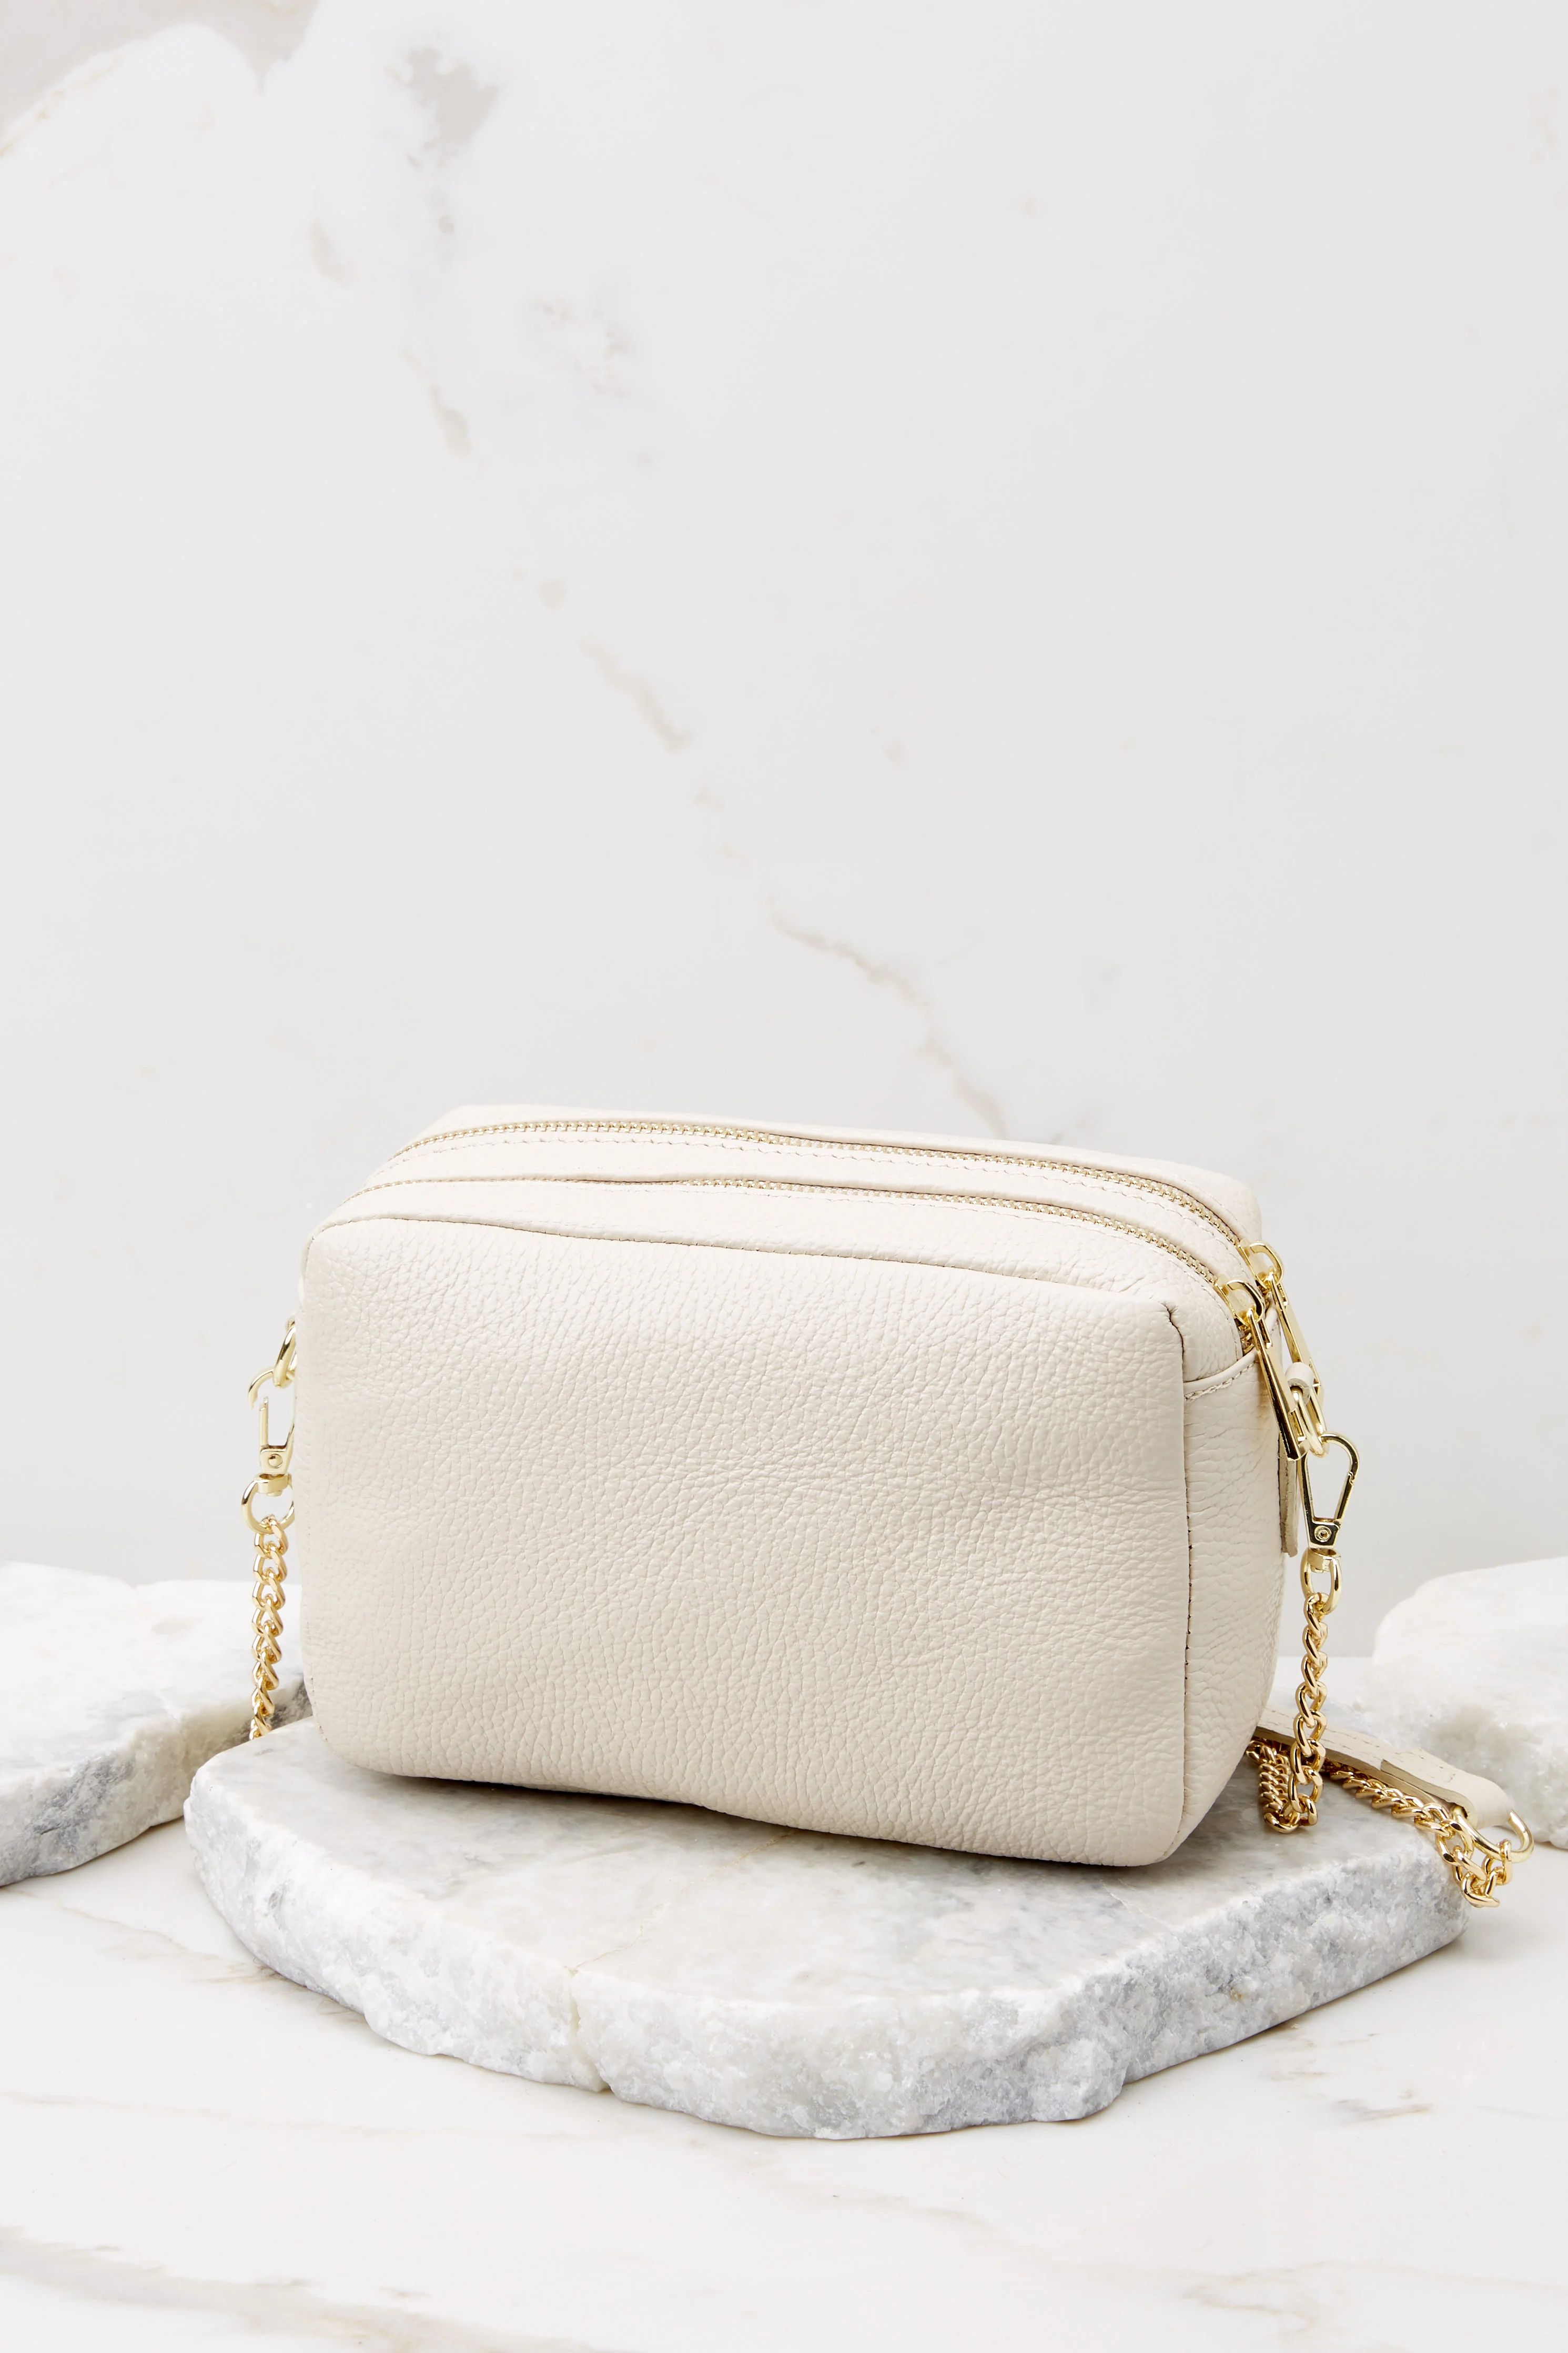 Too Chic Ivory Leather Bag | Red Dress 